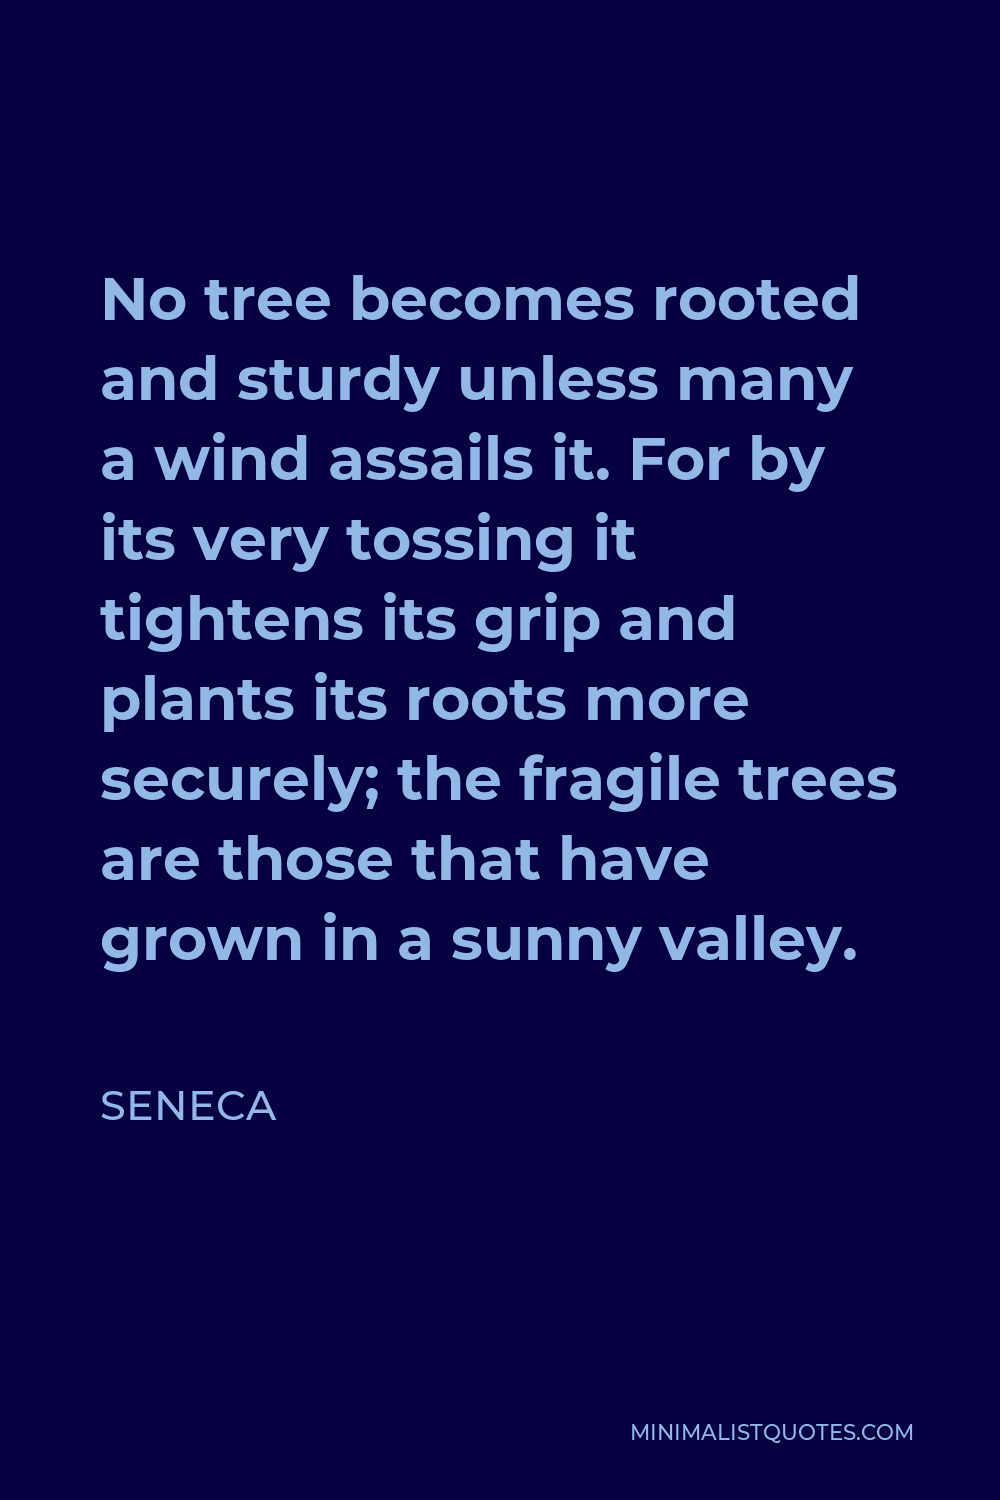 Seneca Quote - No tree becomes rooted and sturdy unless many a wind assails it. For by its very tossing it tightens its grip and plants its roots more securely; the fragile trees are those that have grown in a sunny valley.